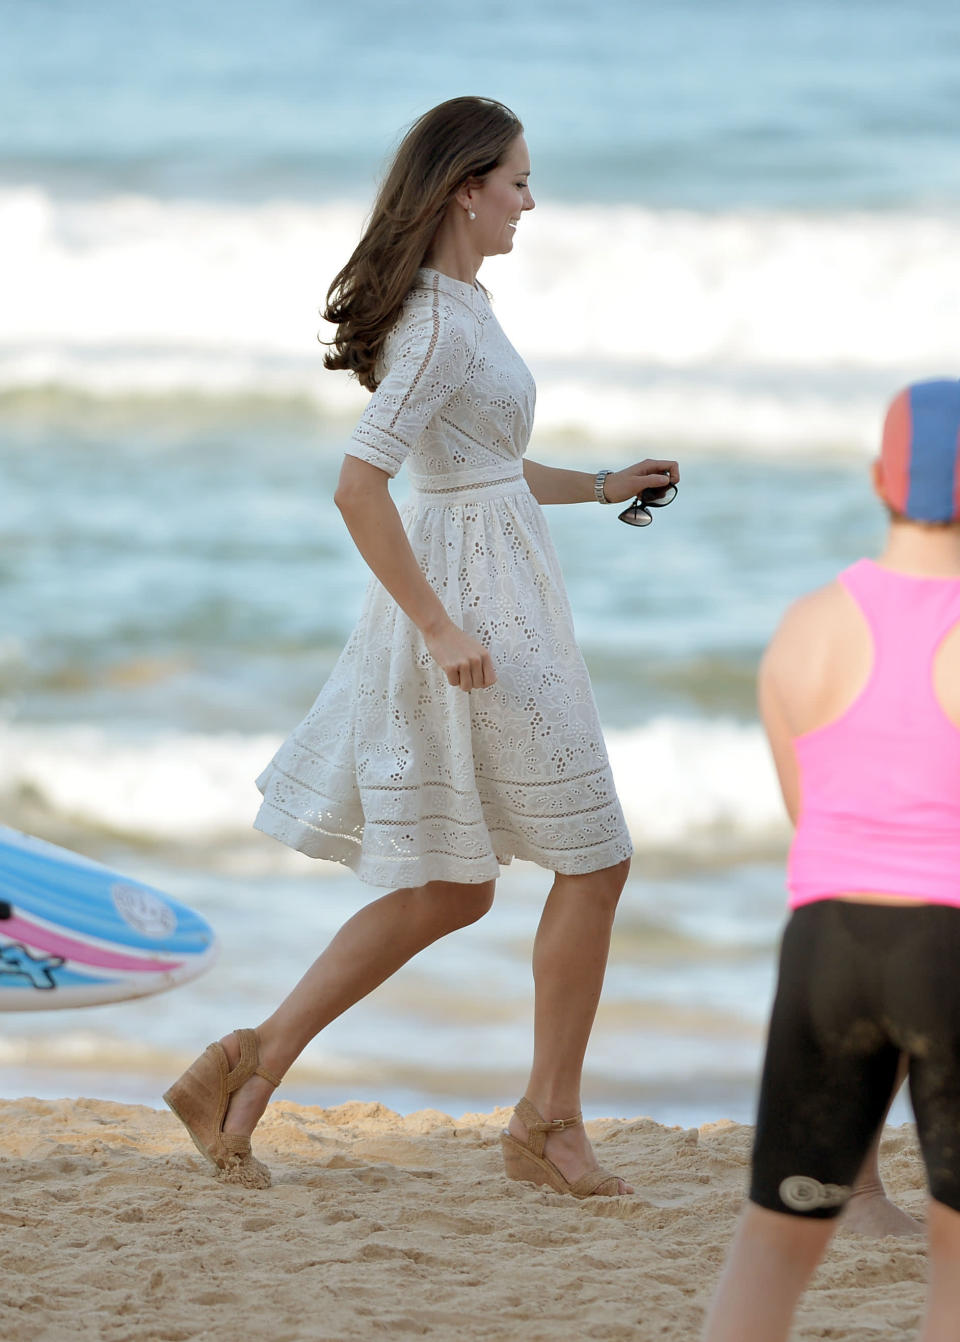 Kate Middleton wore wedged heels during a visit to Manly beach in 2014. Photo: Getty